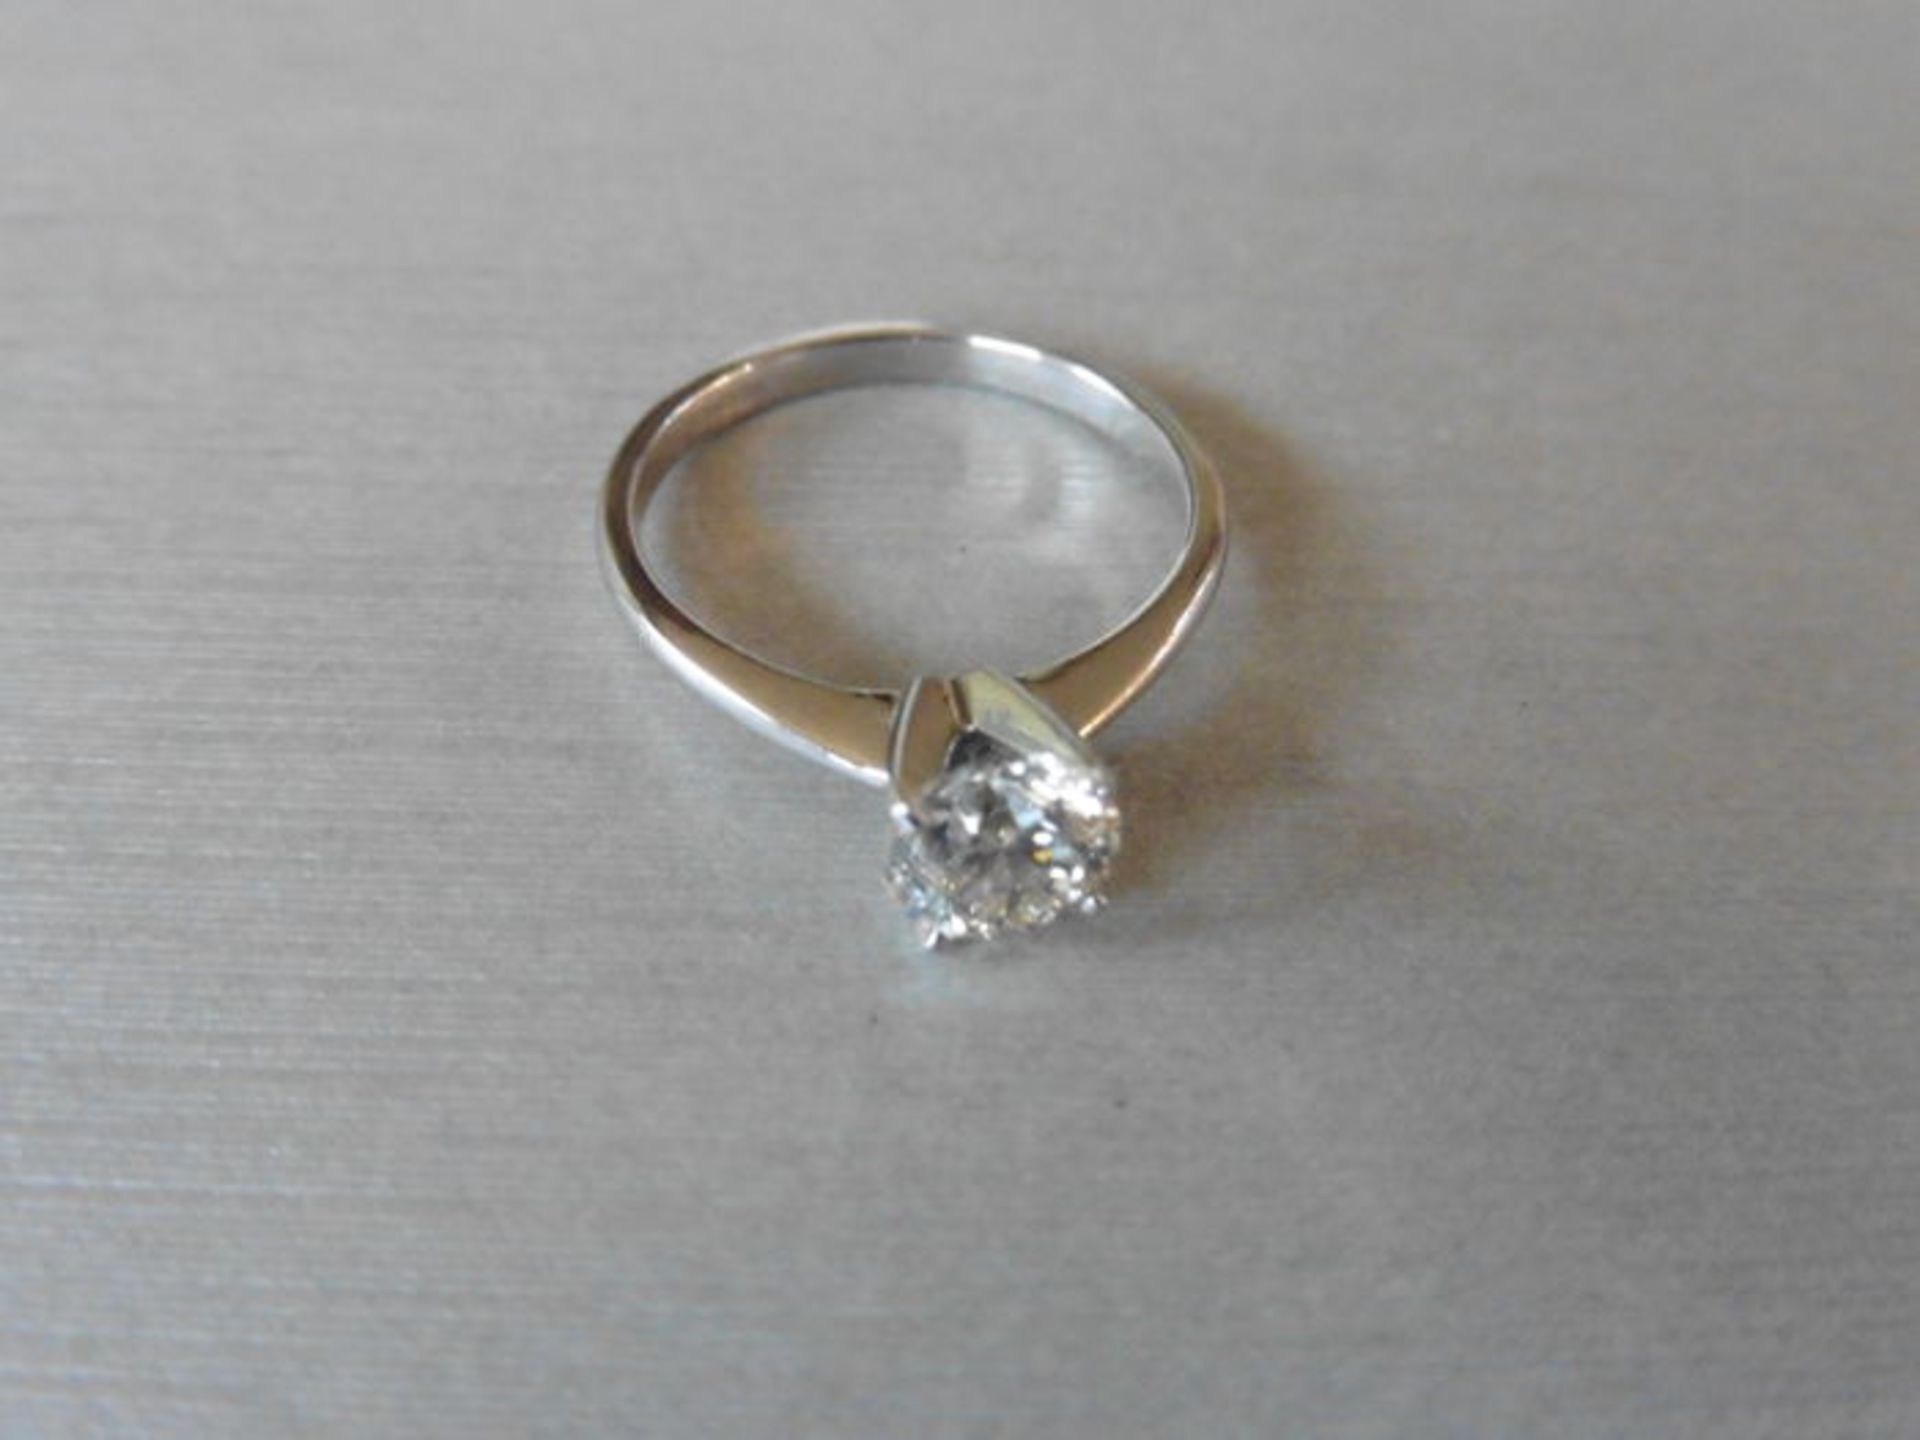 1.00ct diamond solitaire ring set in platinum. I colour and I1 clarity. 4 claw setting, size M. - Image 2 of 3